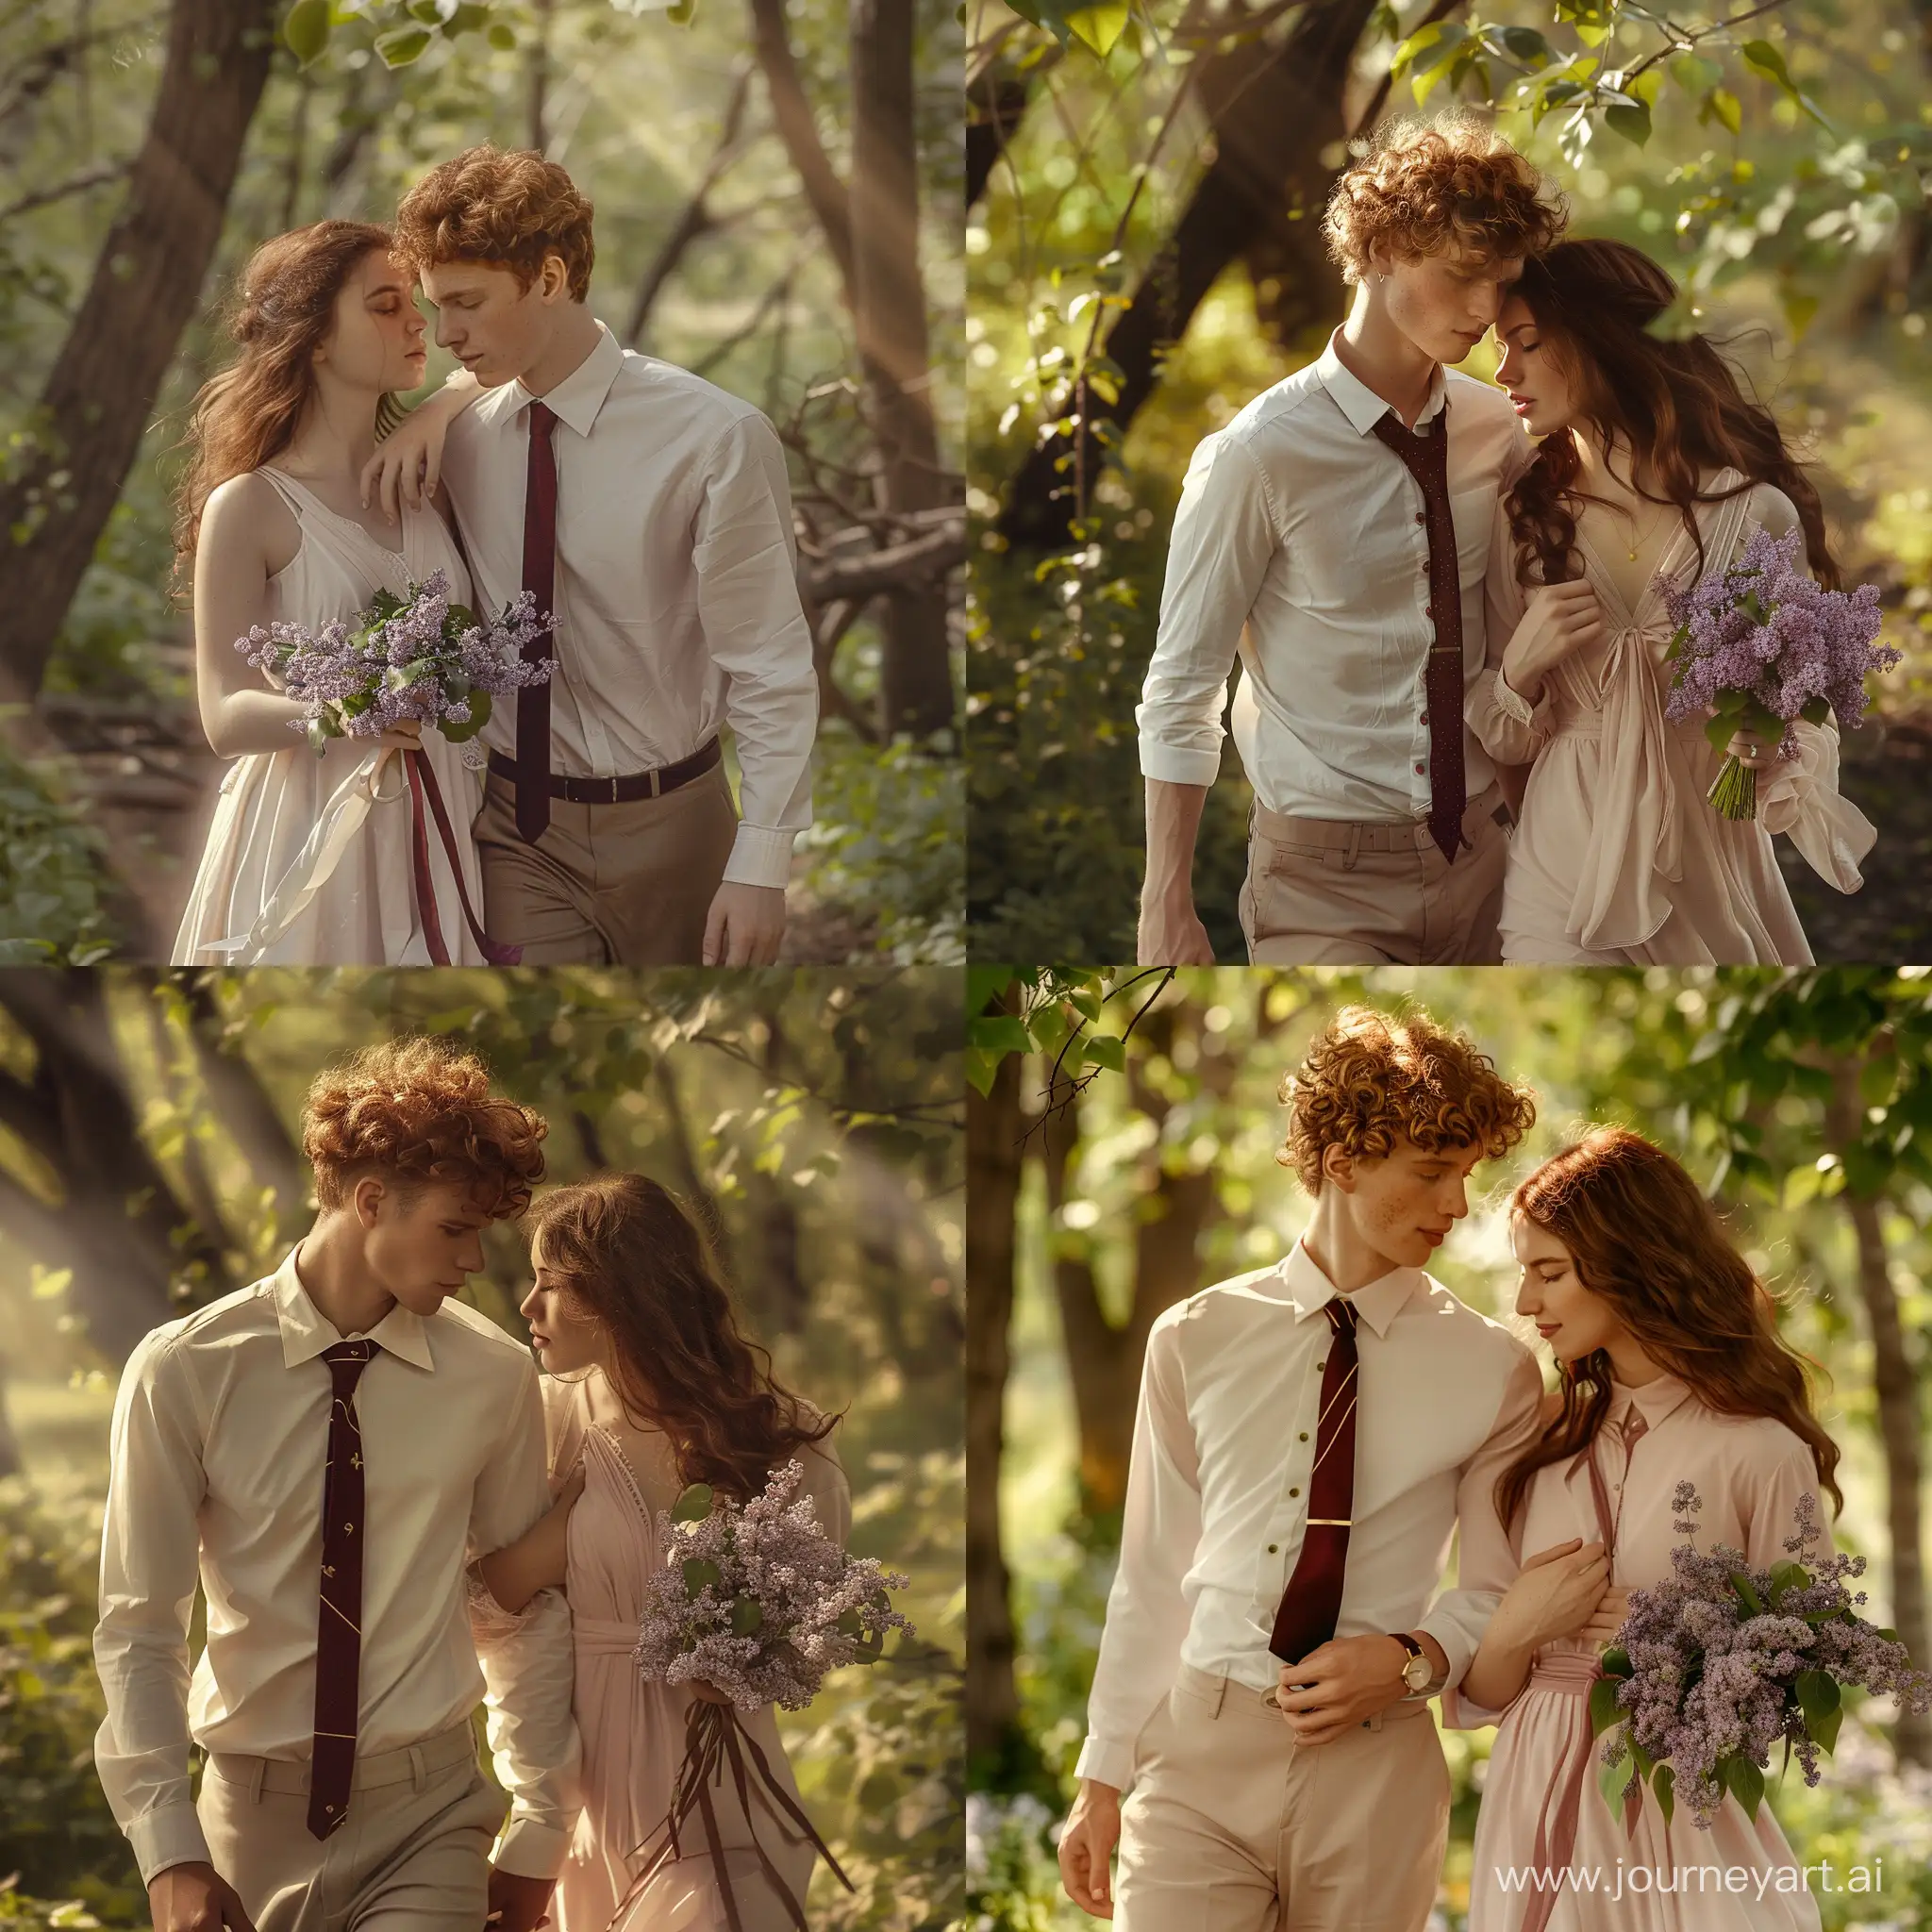 Romantic-Couple-Embracing-in-Sunlit-Forest-Clearing-with-Field-Lilac-Flowers